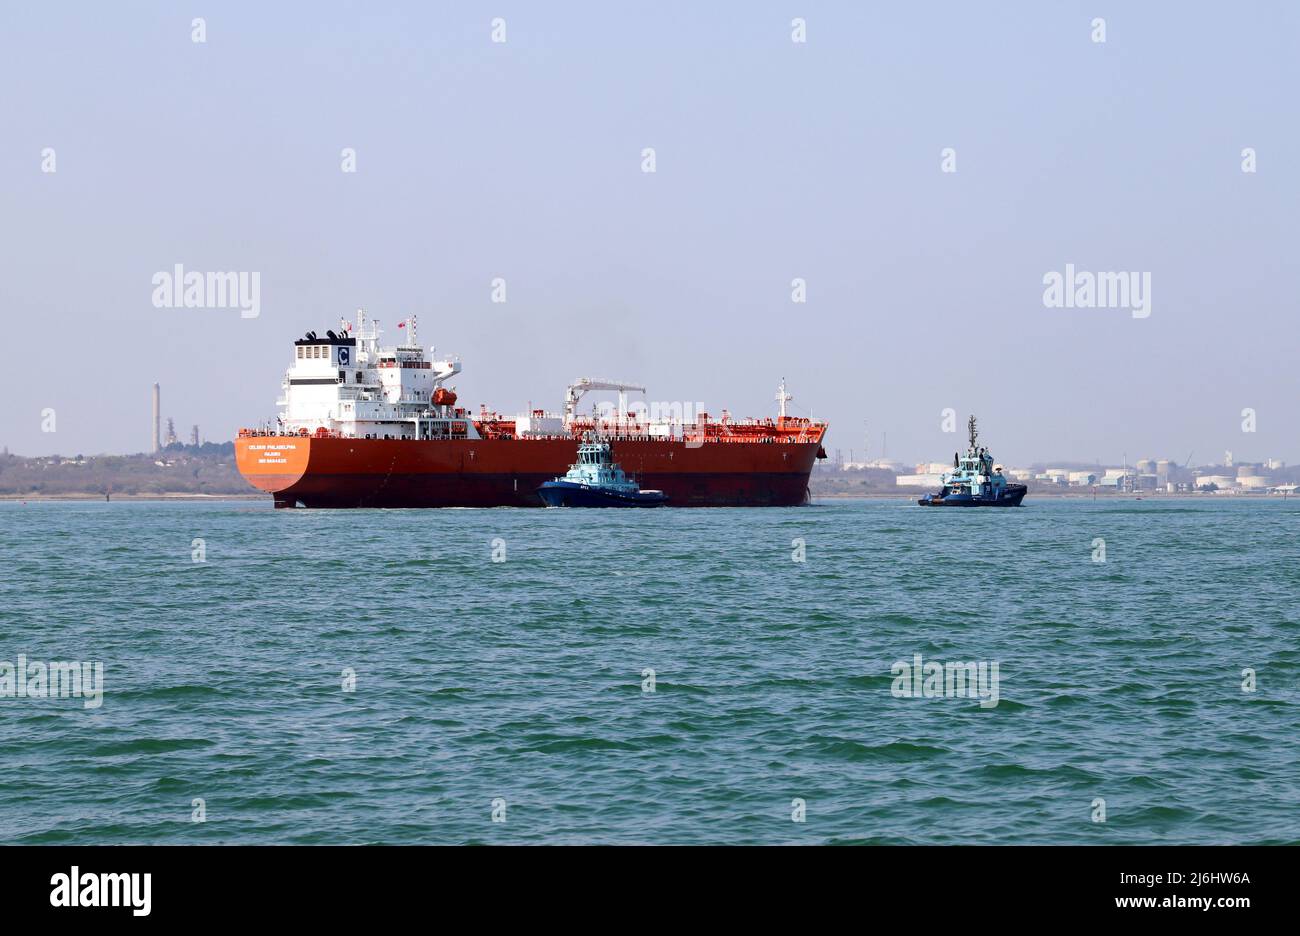 Tugs Apex and Lomax assist the Oil & Chemical Tanker Celcius Philadelphia at Fawley Oil Terminal on Southampton Water Stock Photo